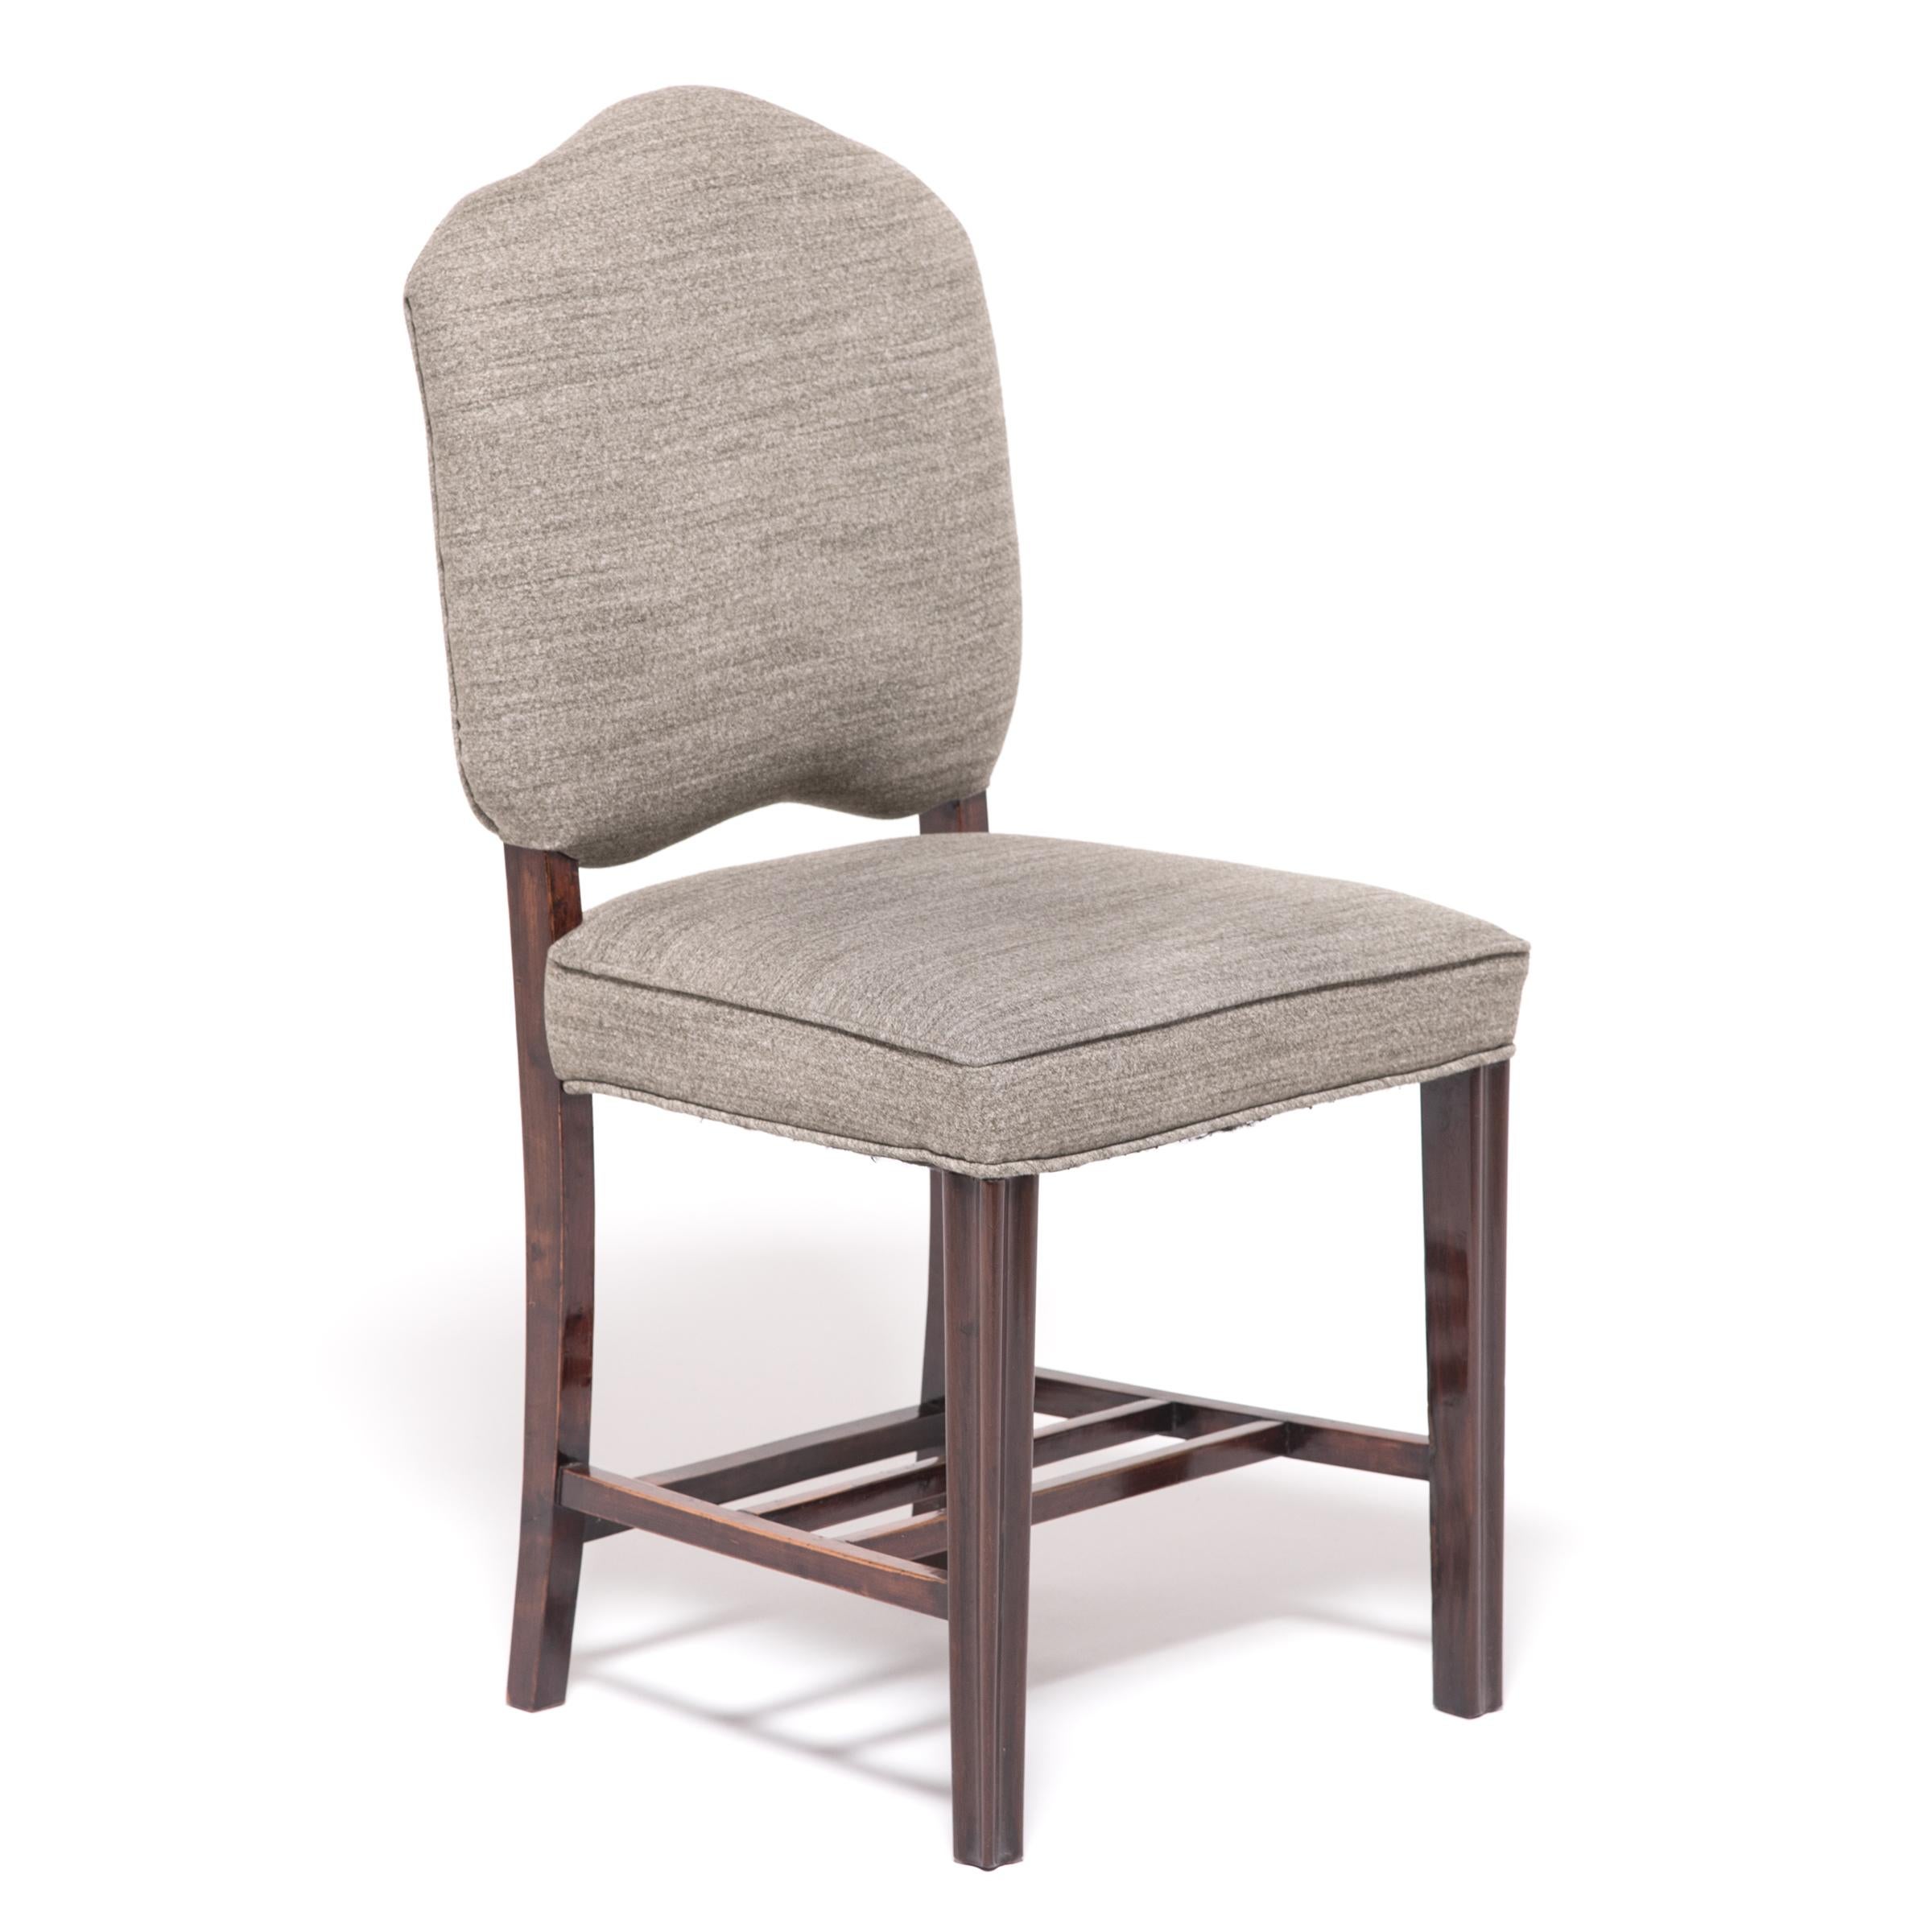 Made in the 1920s to satisfy the worldwide hunger for all things Art Deco, these unique chairs combine the streamlined style of the era with a Classic Chinese aesthetic. The beautiful hardwood frames hint at tradition with bamboo-like modeling and